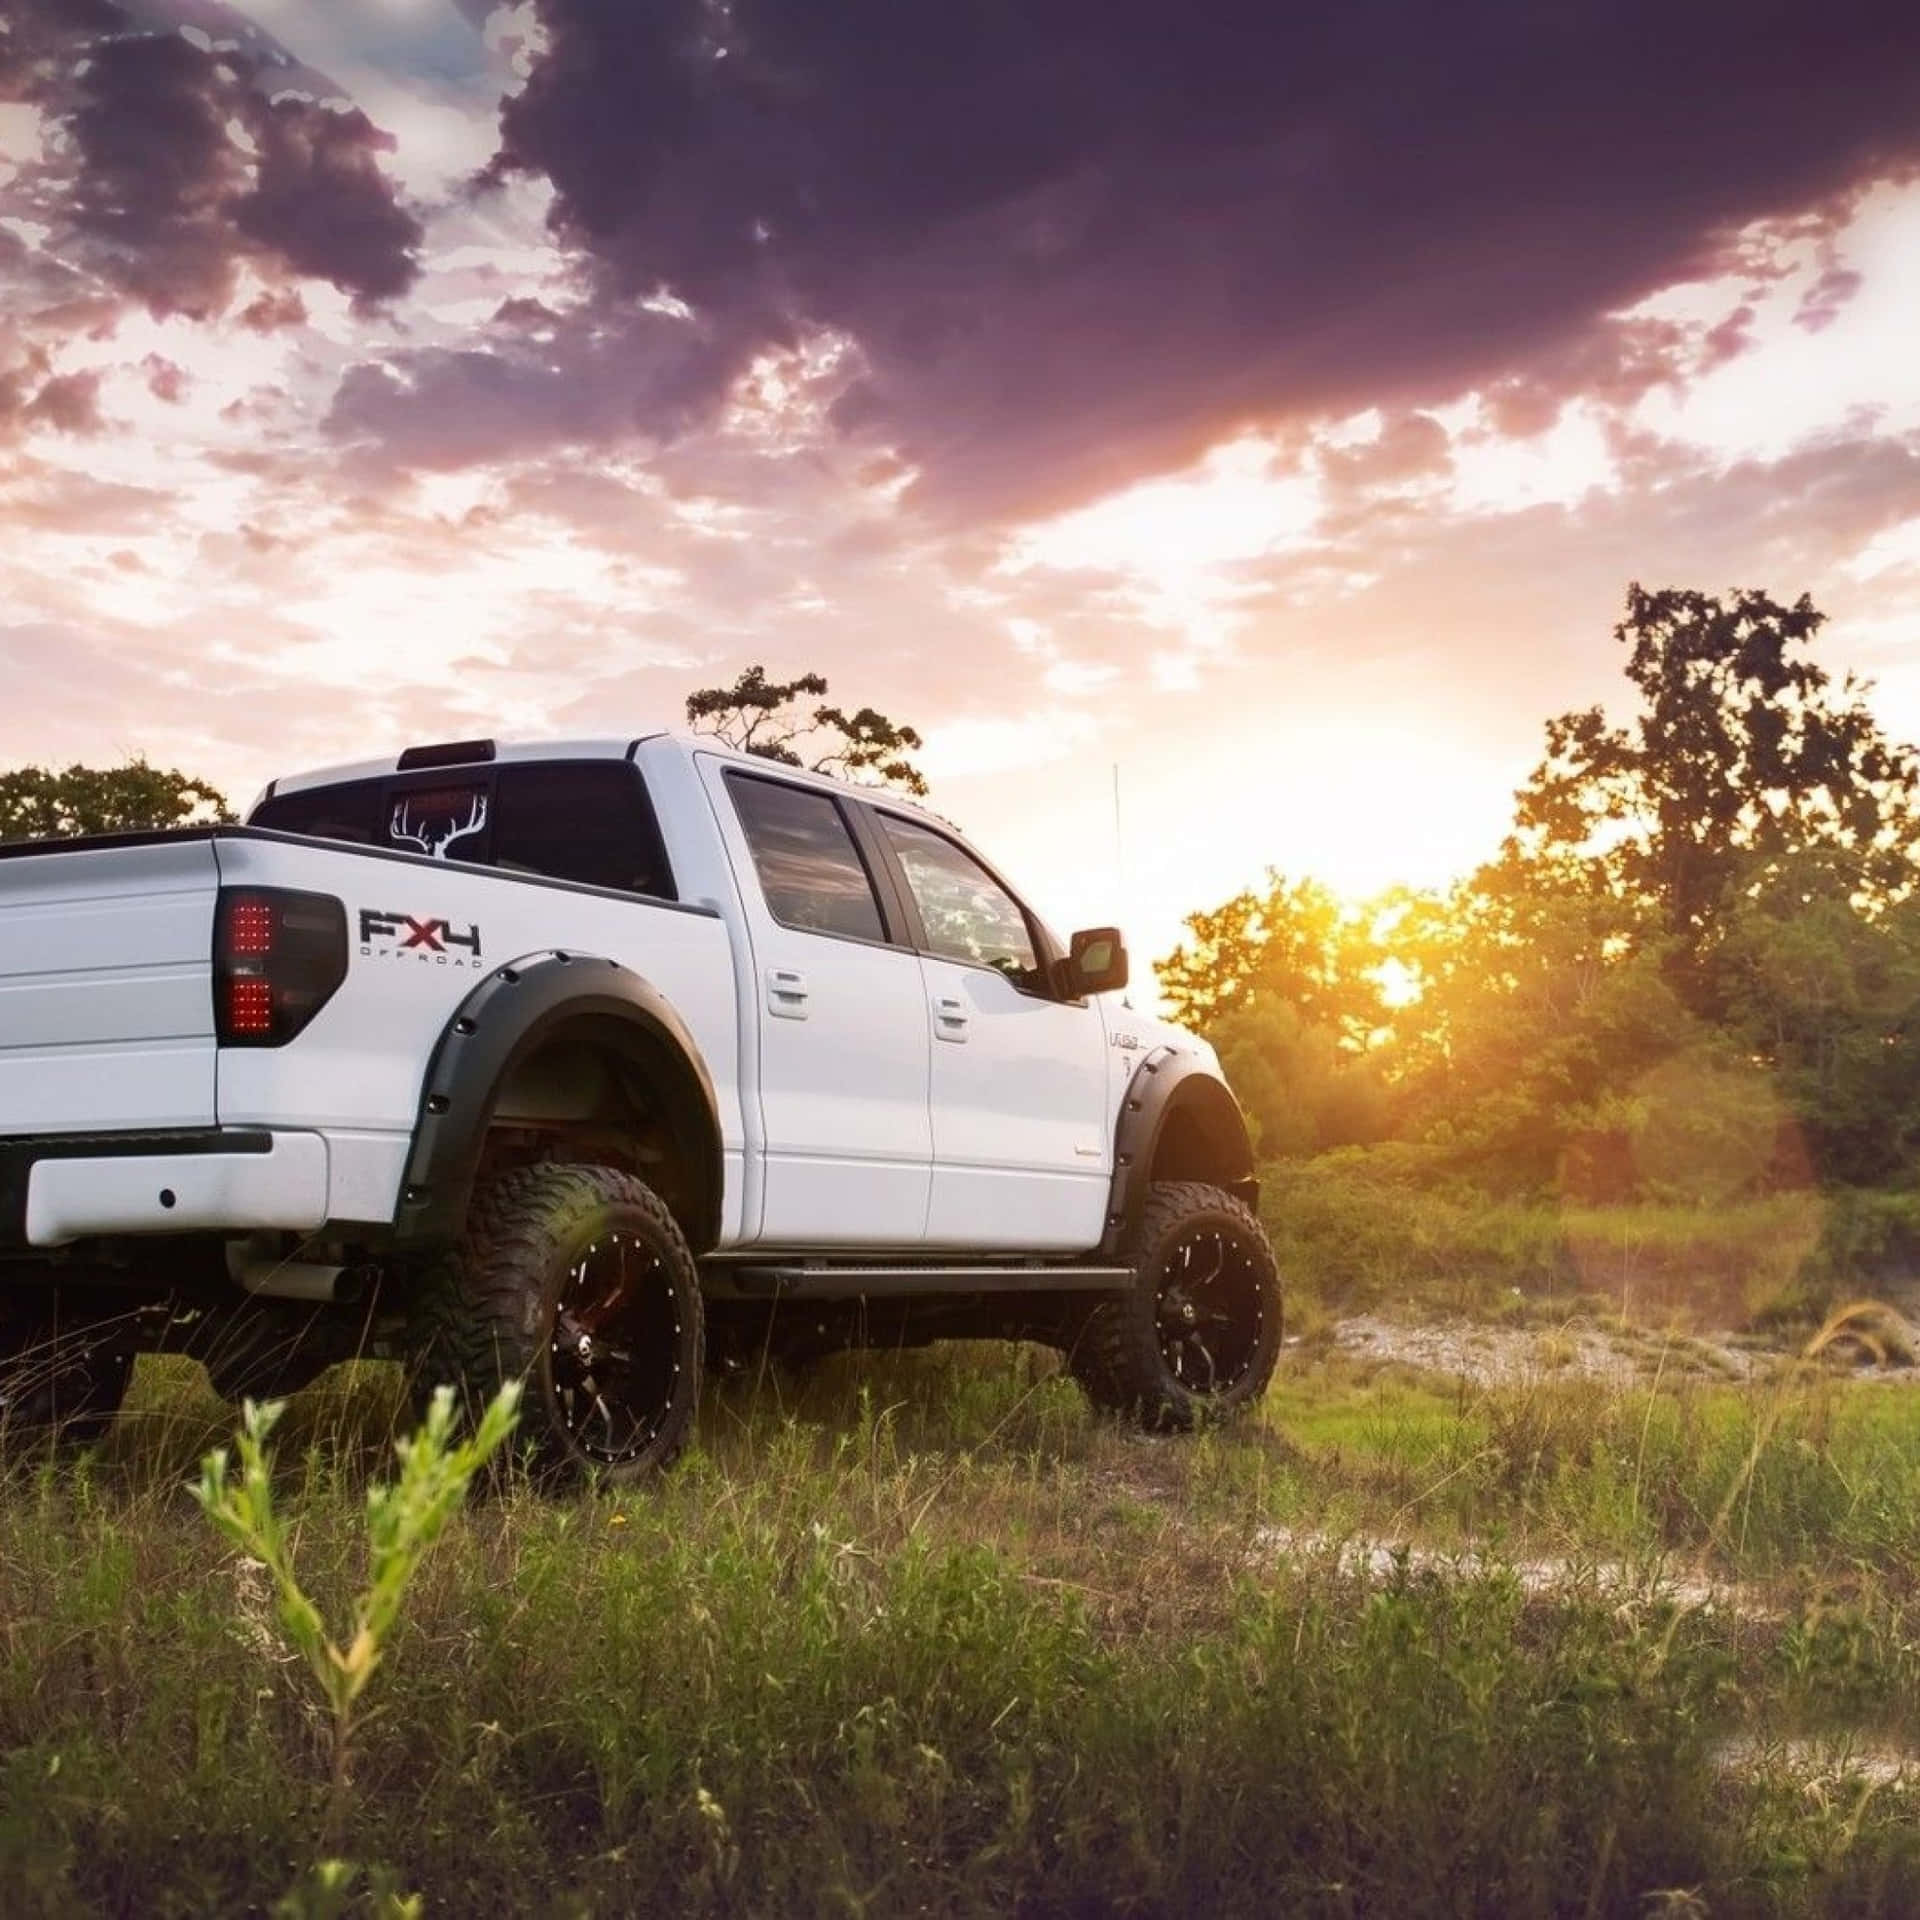 A White Truck Parked In A Field At Sunset